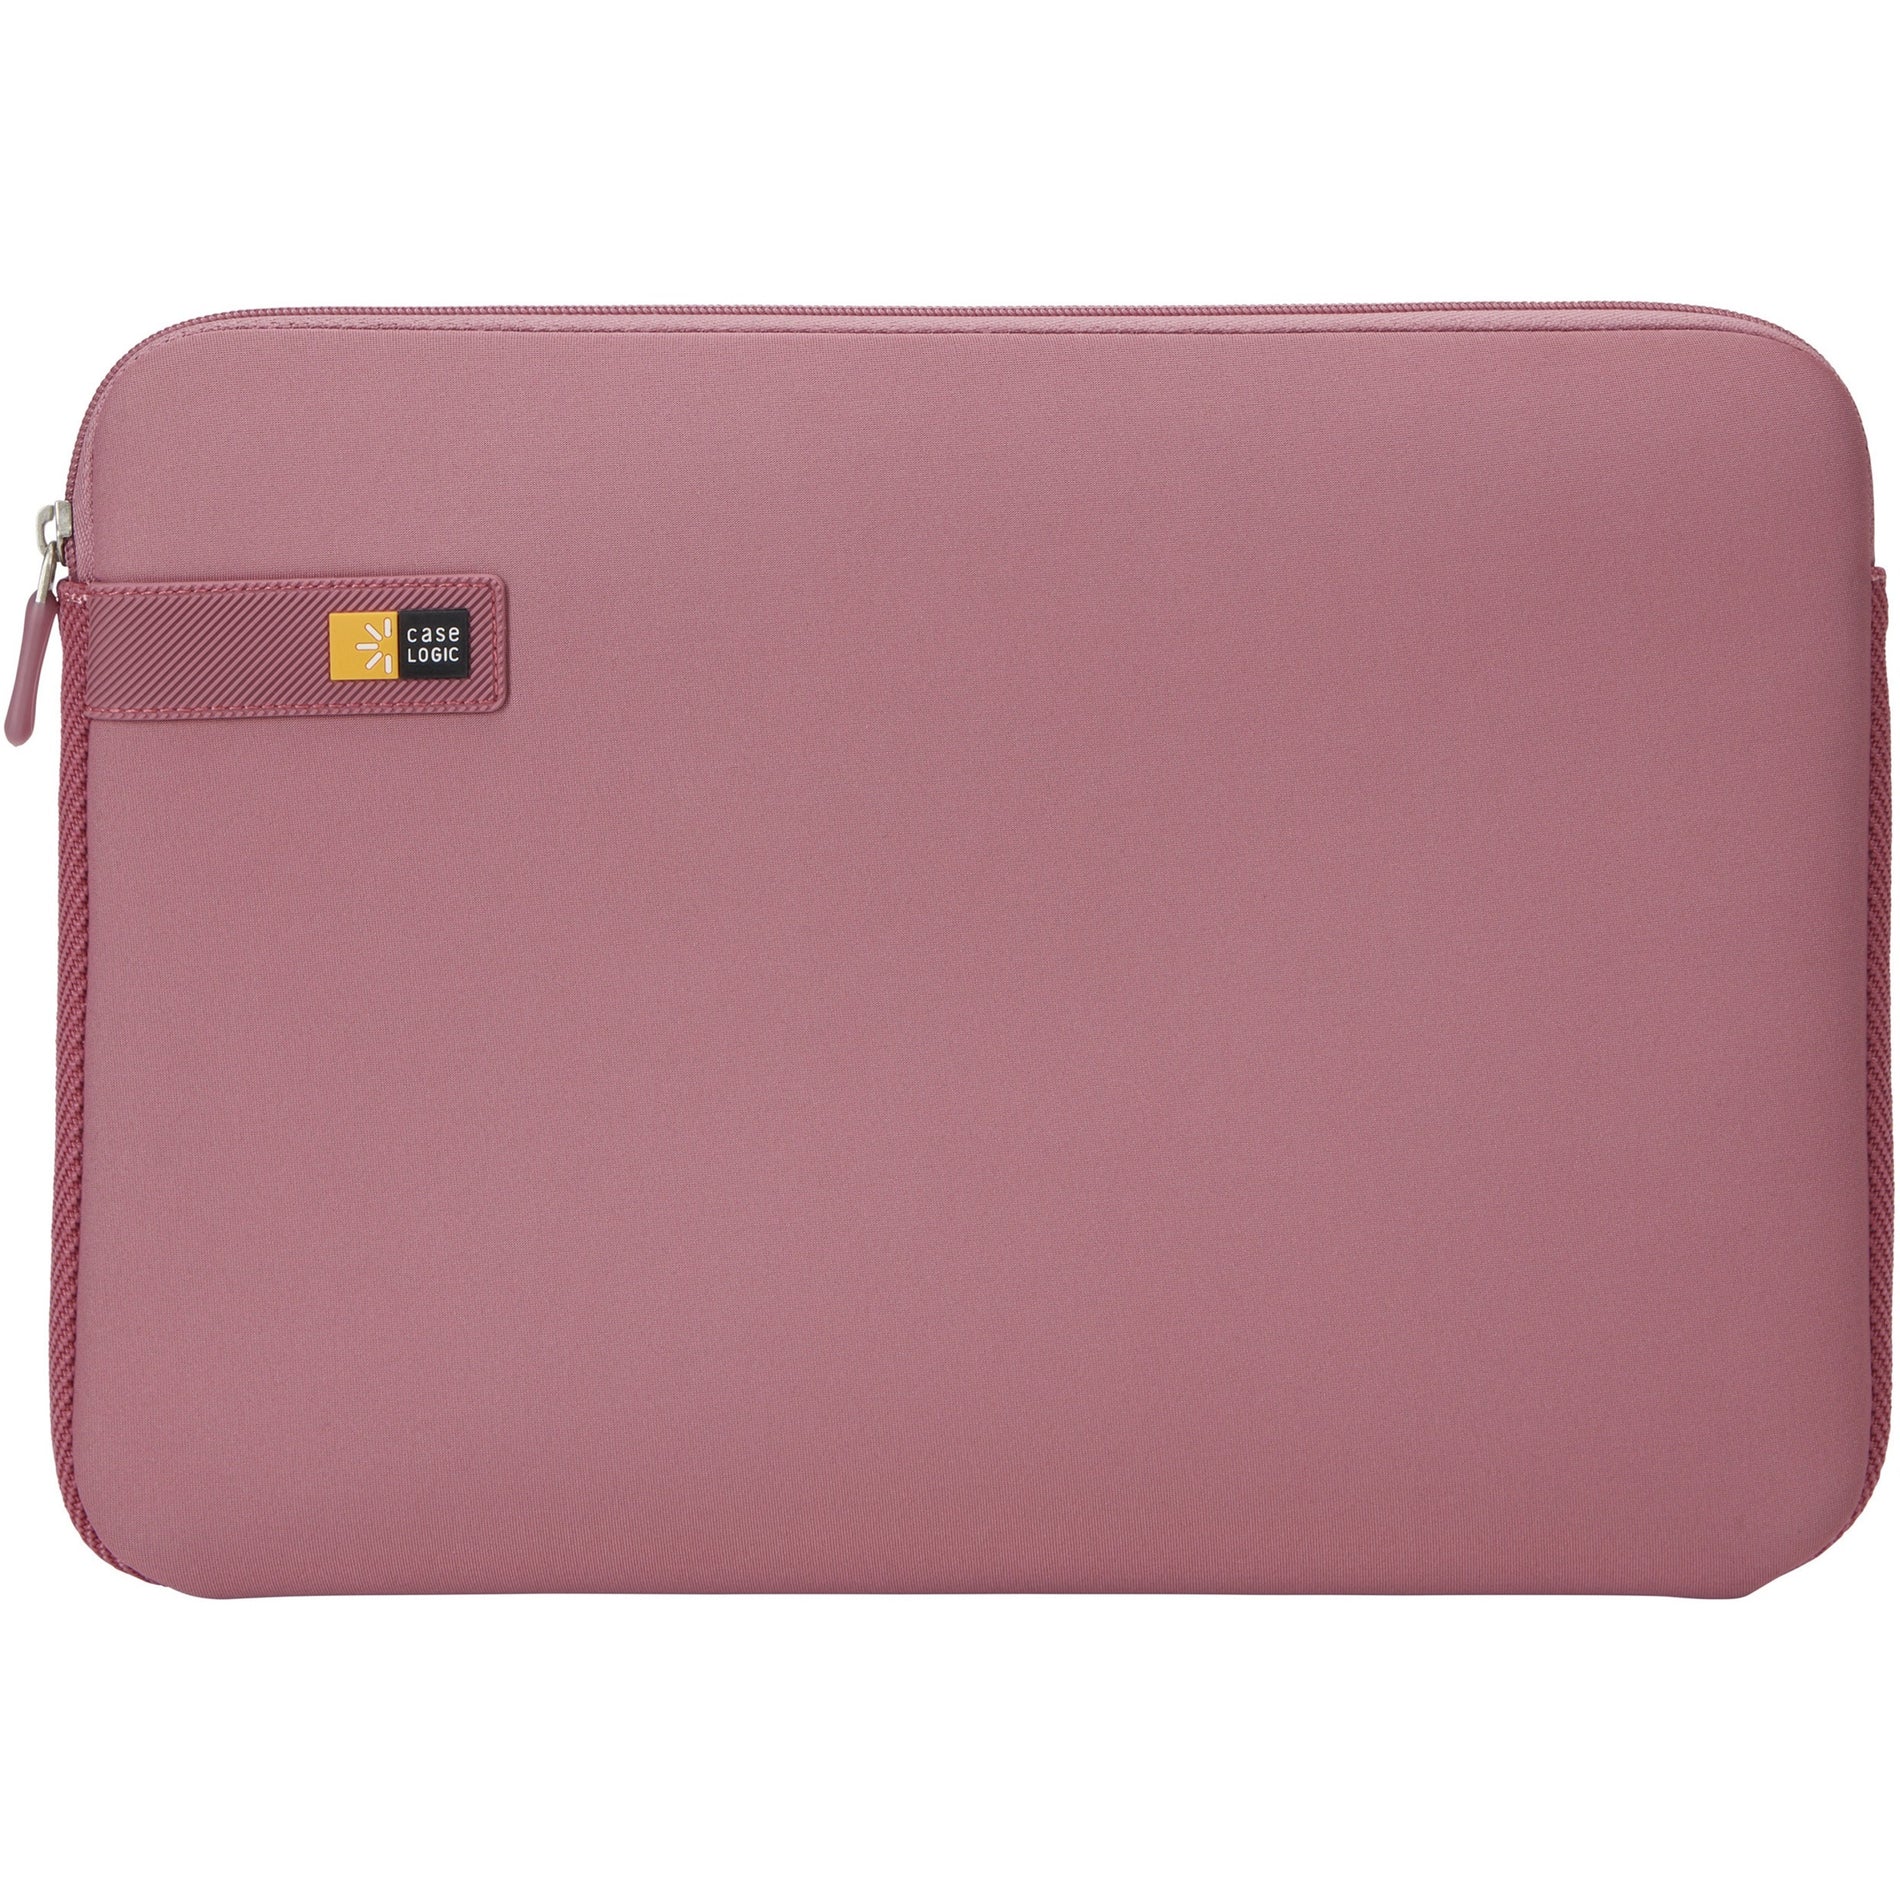 Case Logic 3203750 13.3" Laptop and MacBook Sleeve, Heather Rose Polyester Carrying Case